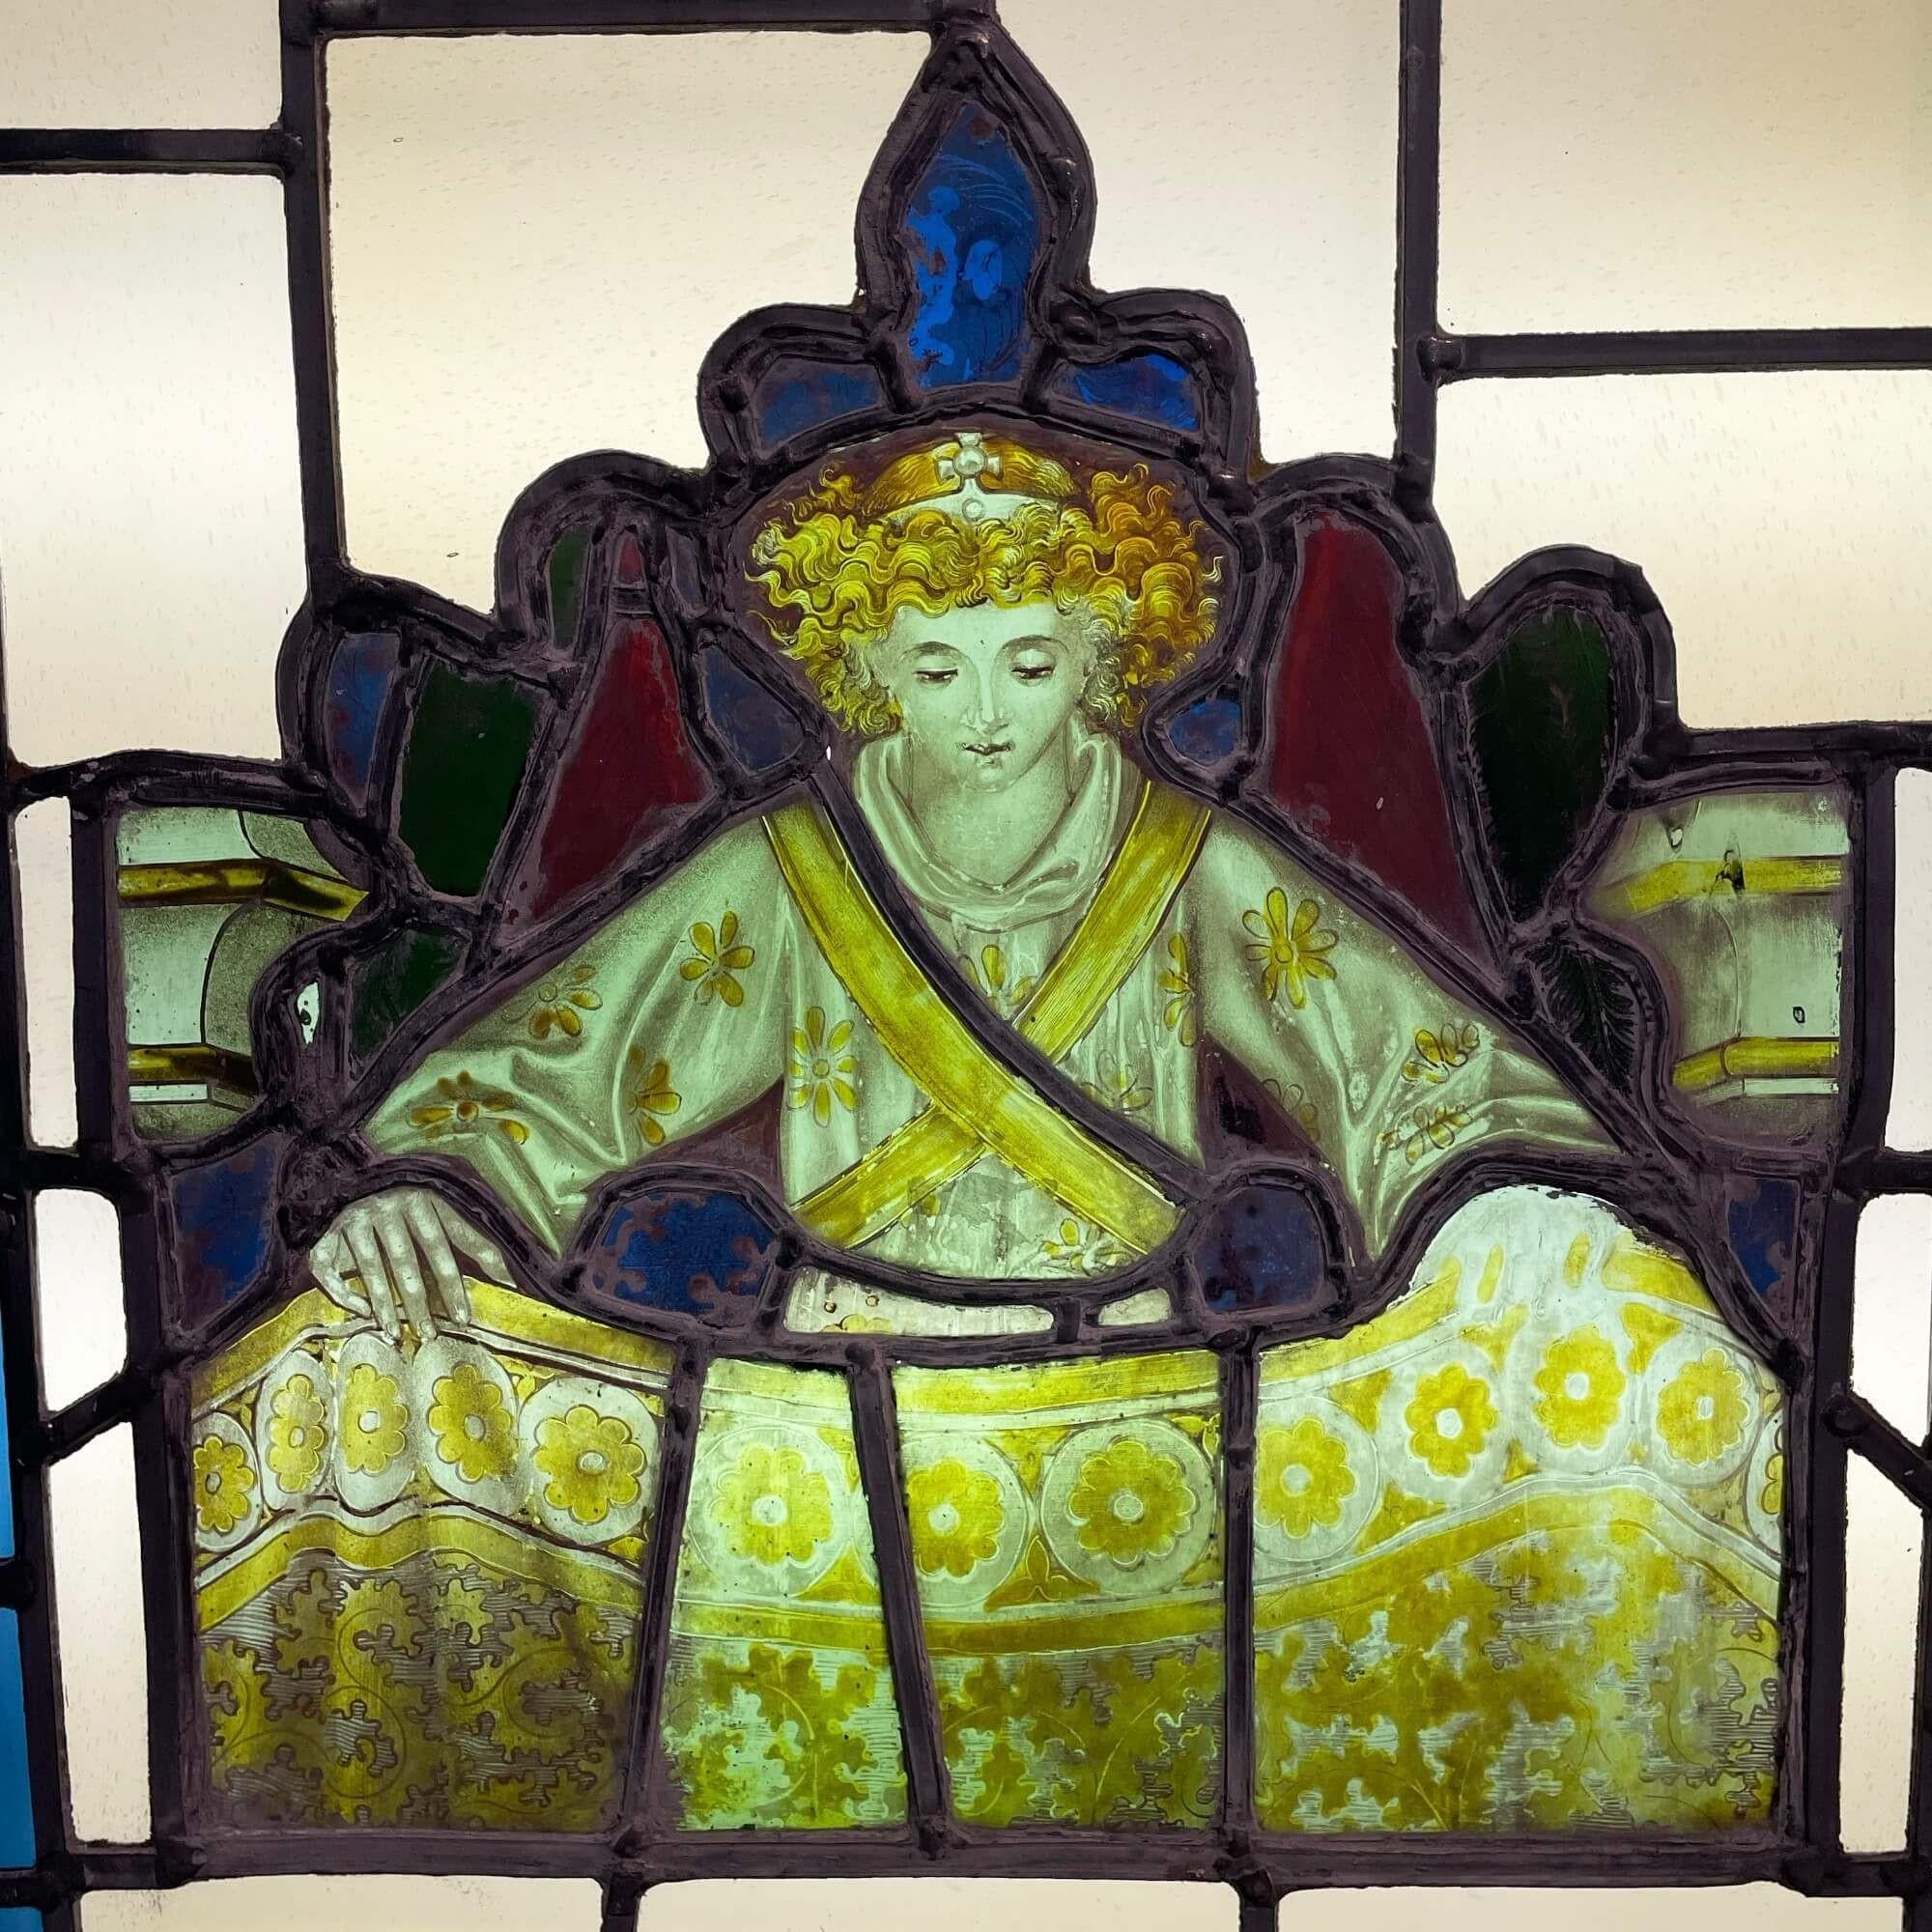 An antique Victorian stained glass window, the original centre panel of which dates to circa 1830. Later set within a frame in the mid 20th century to create a larger display piece.

This unusual antique window depicts a young boy dressed in yellow